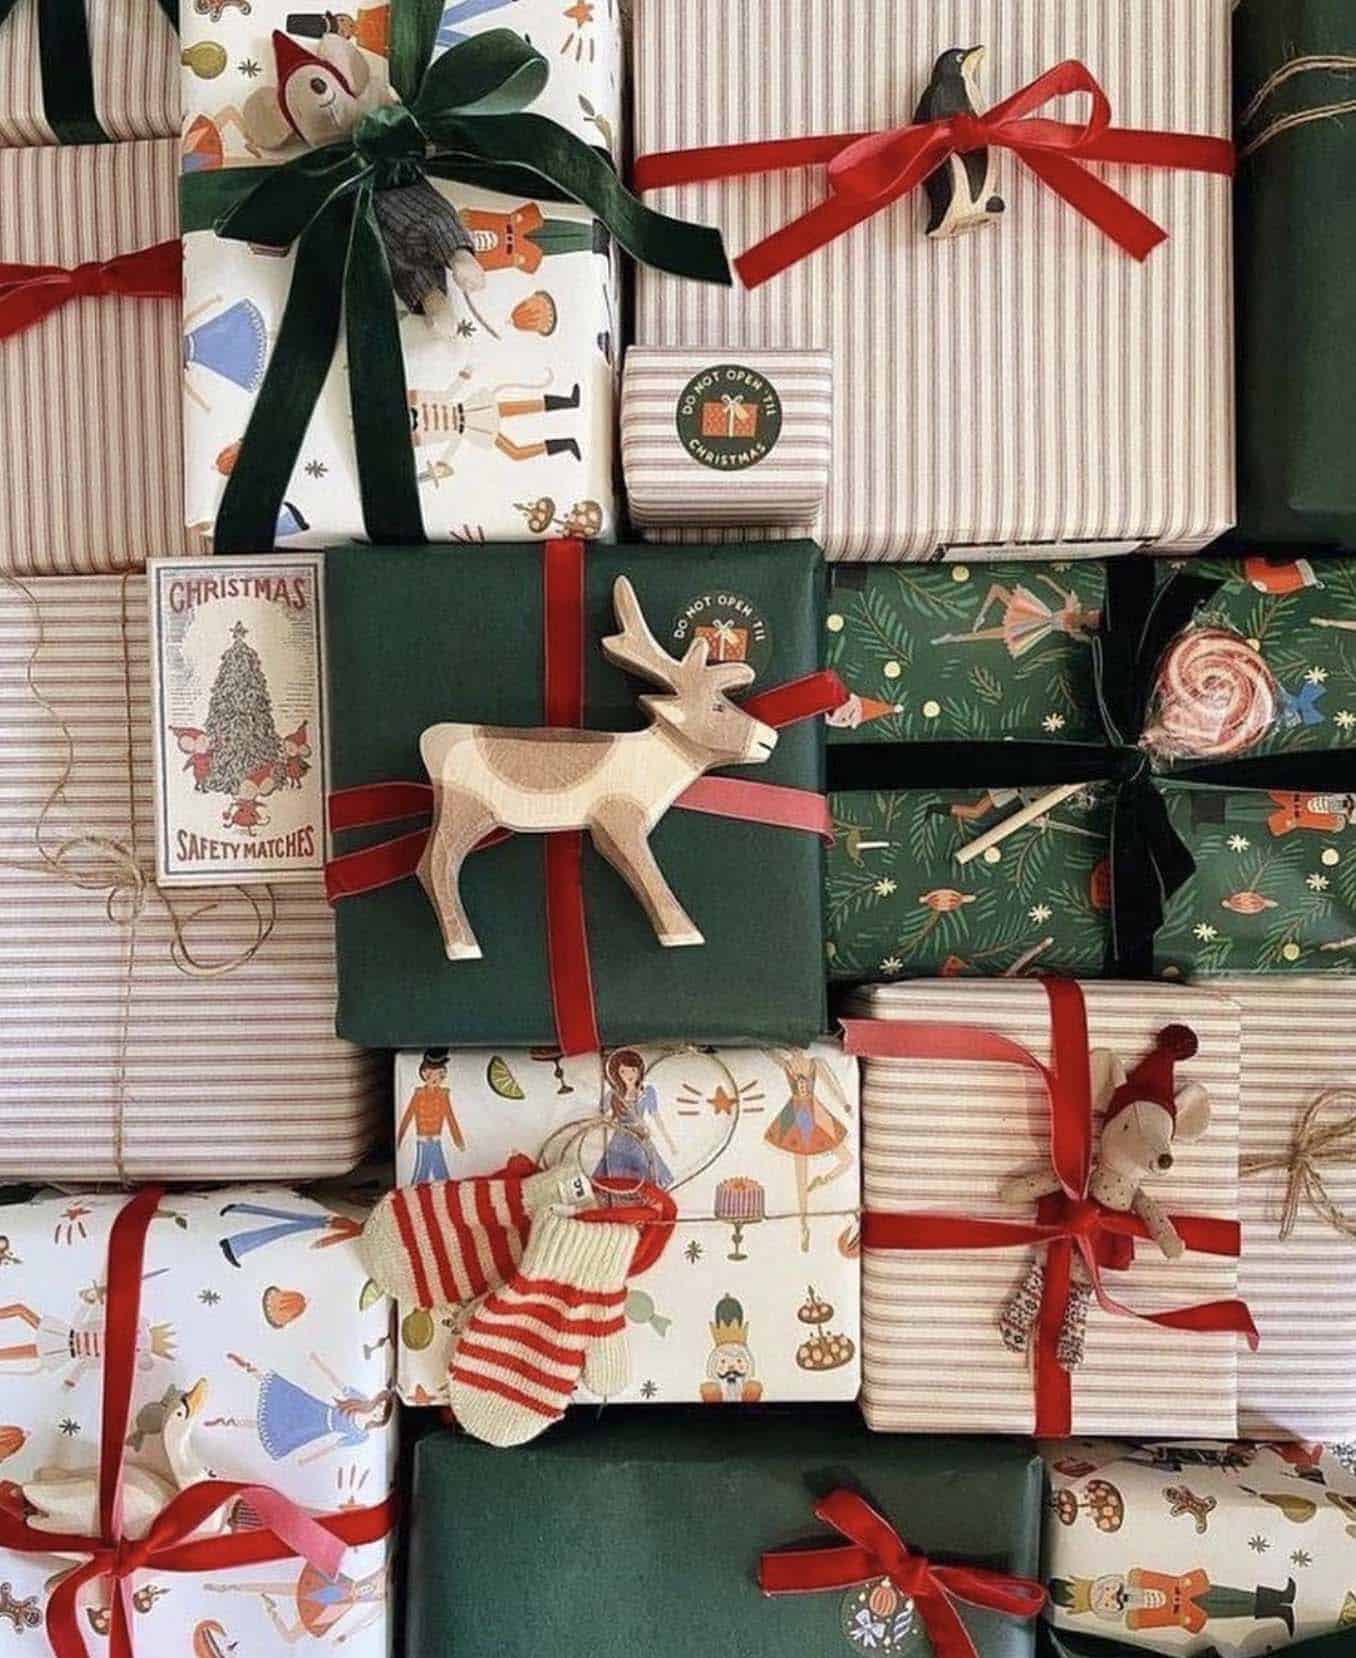 festive gift wrapping with ornaments and ribbon